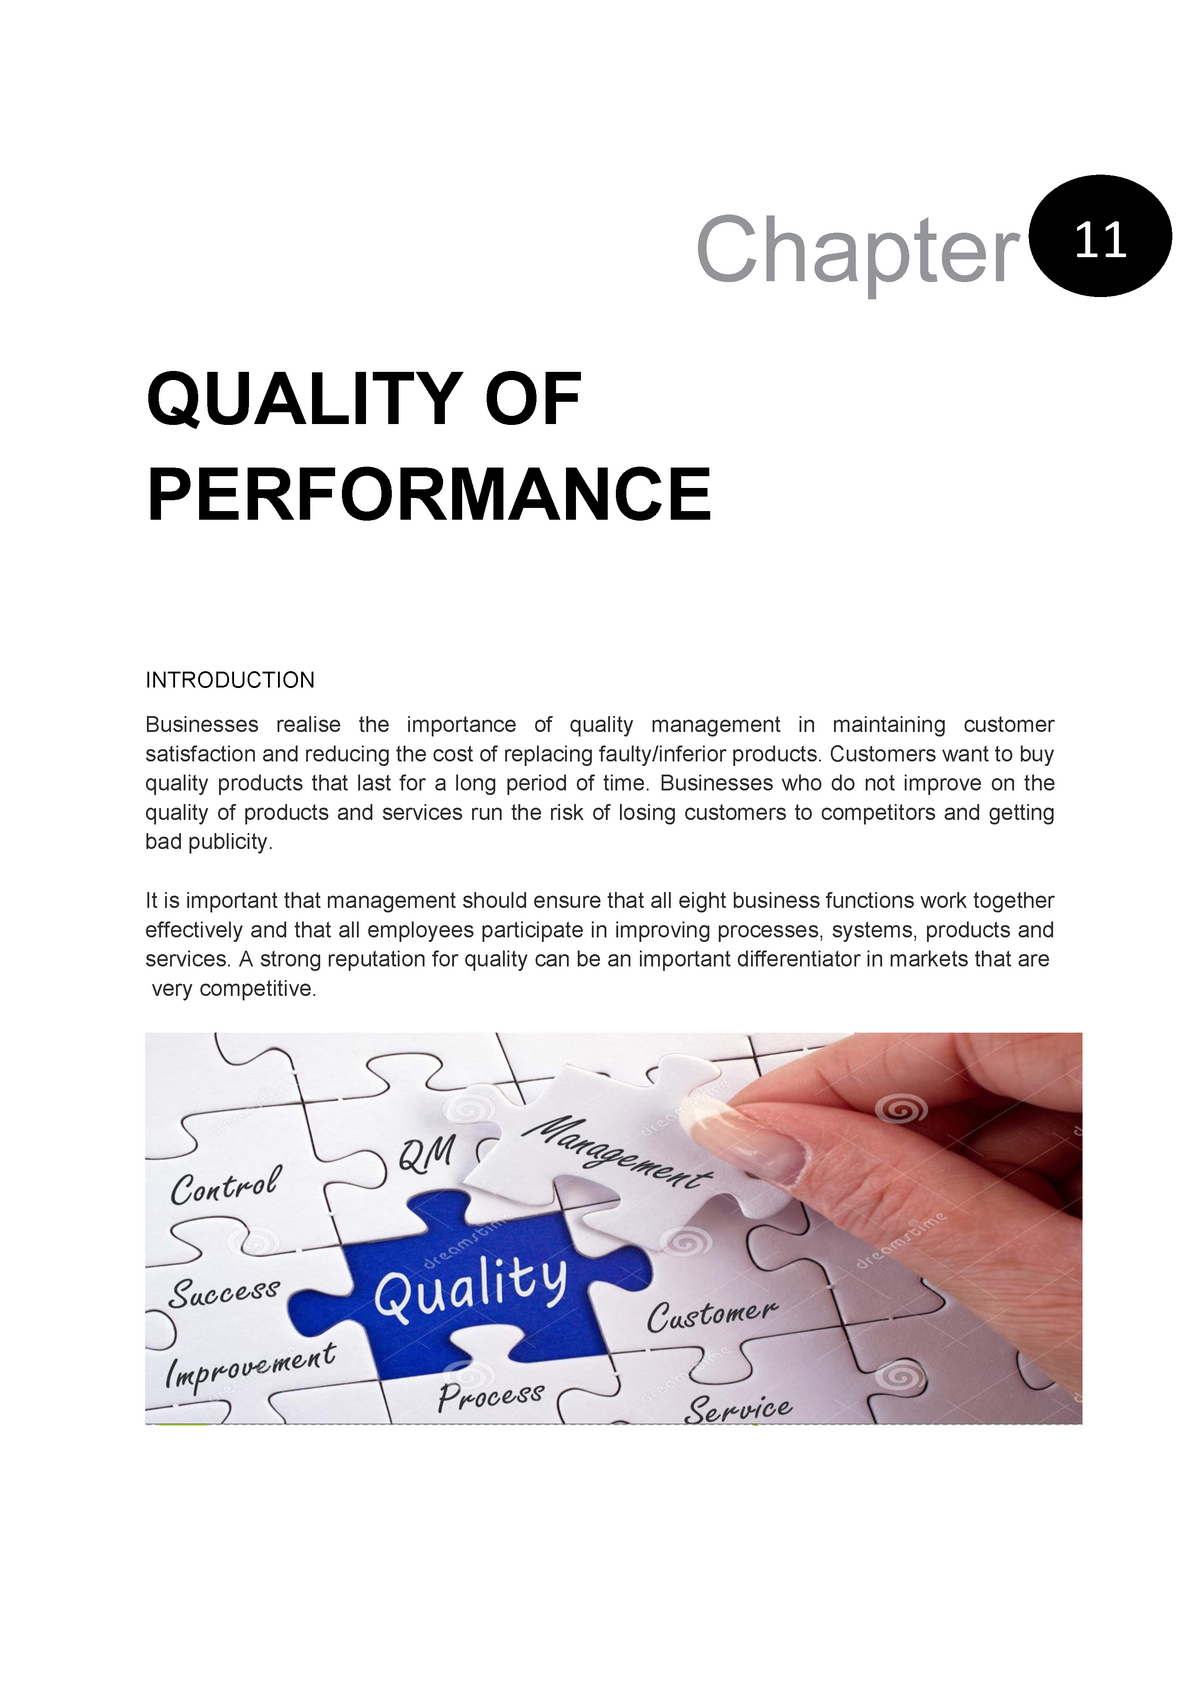 essay about quality performance